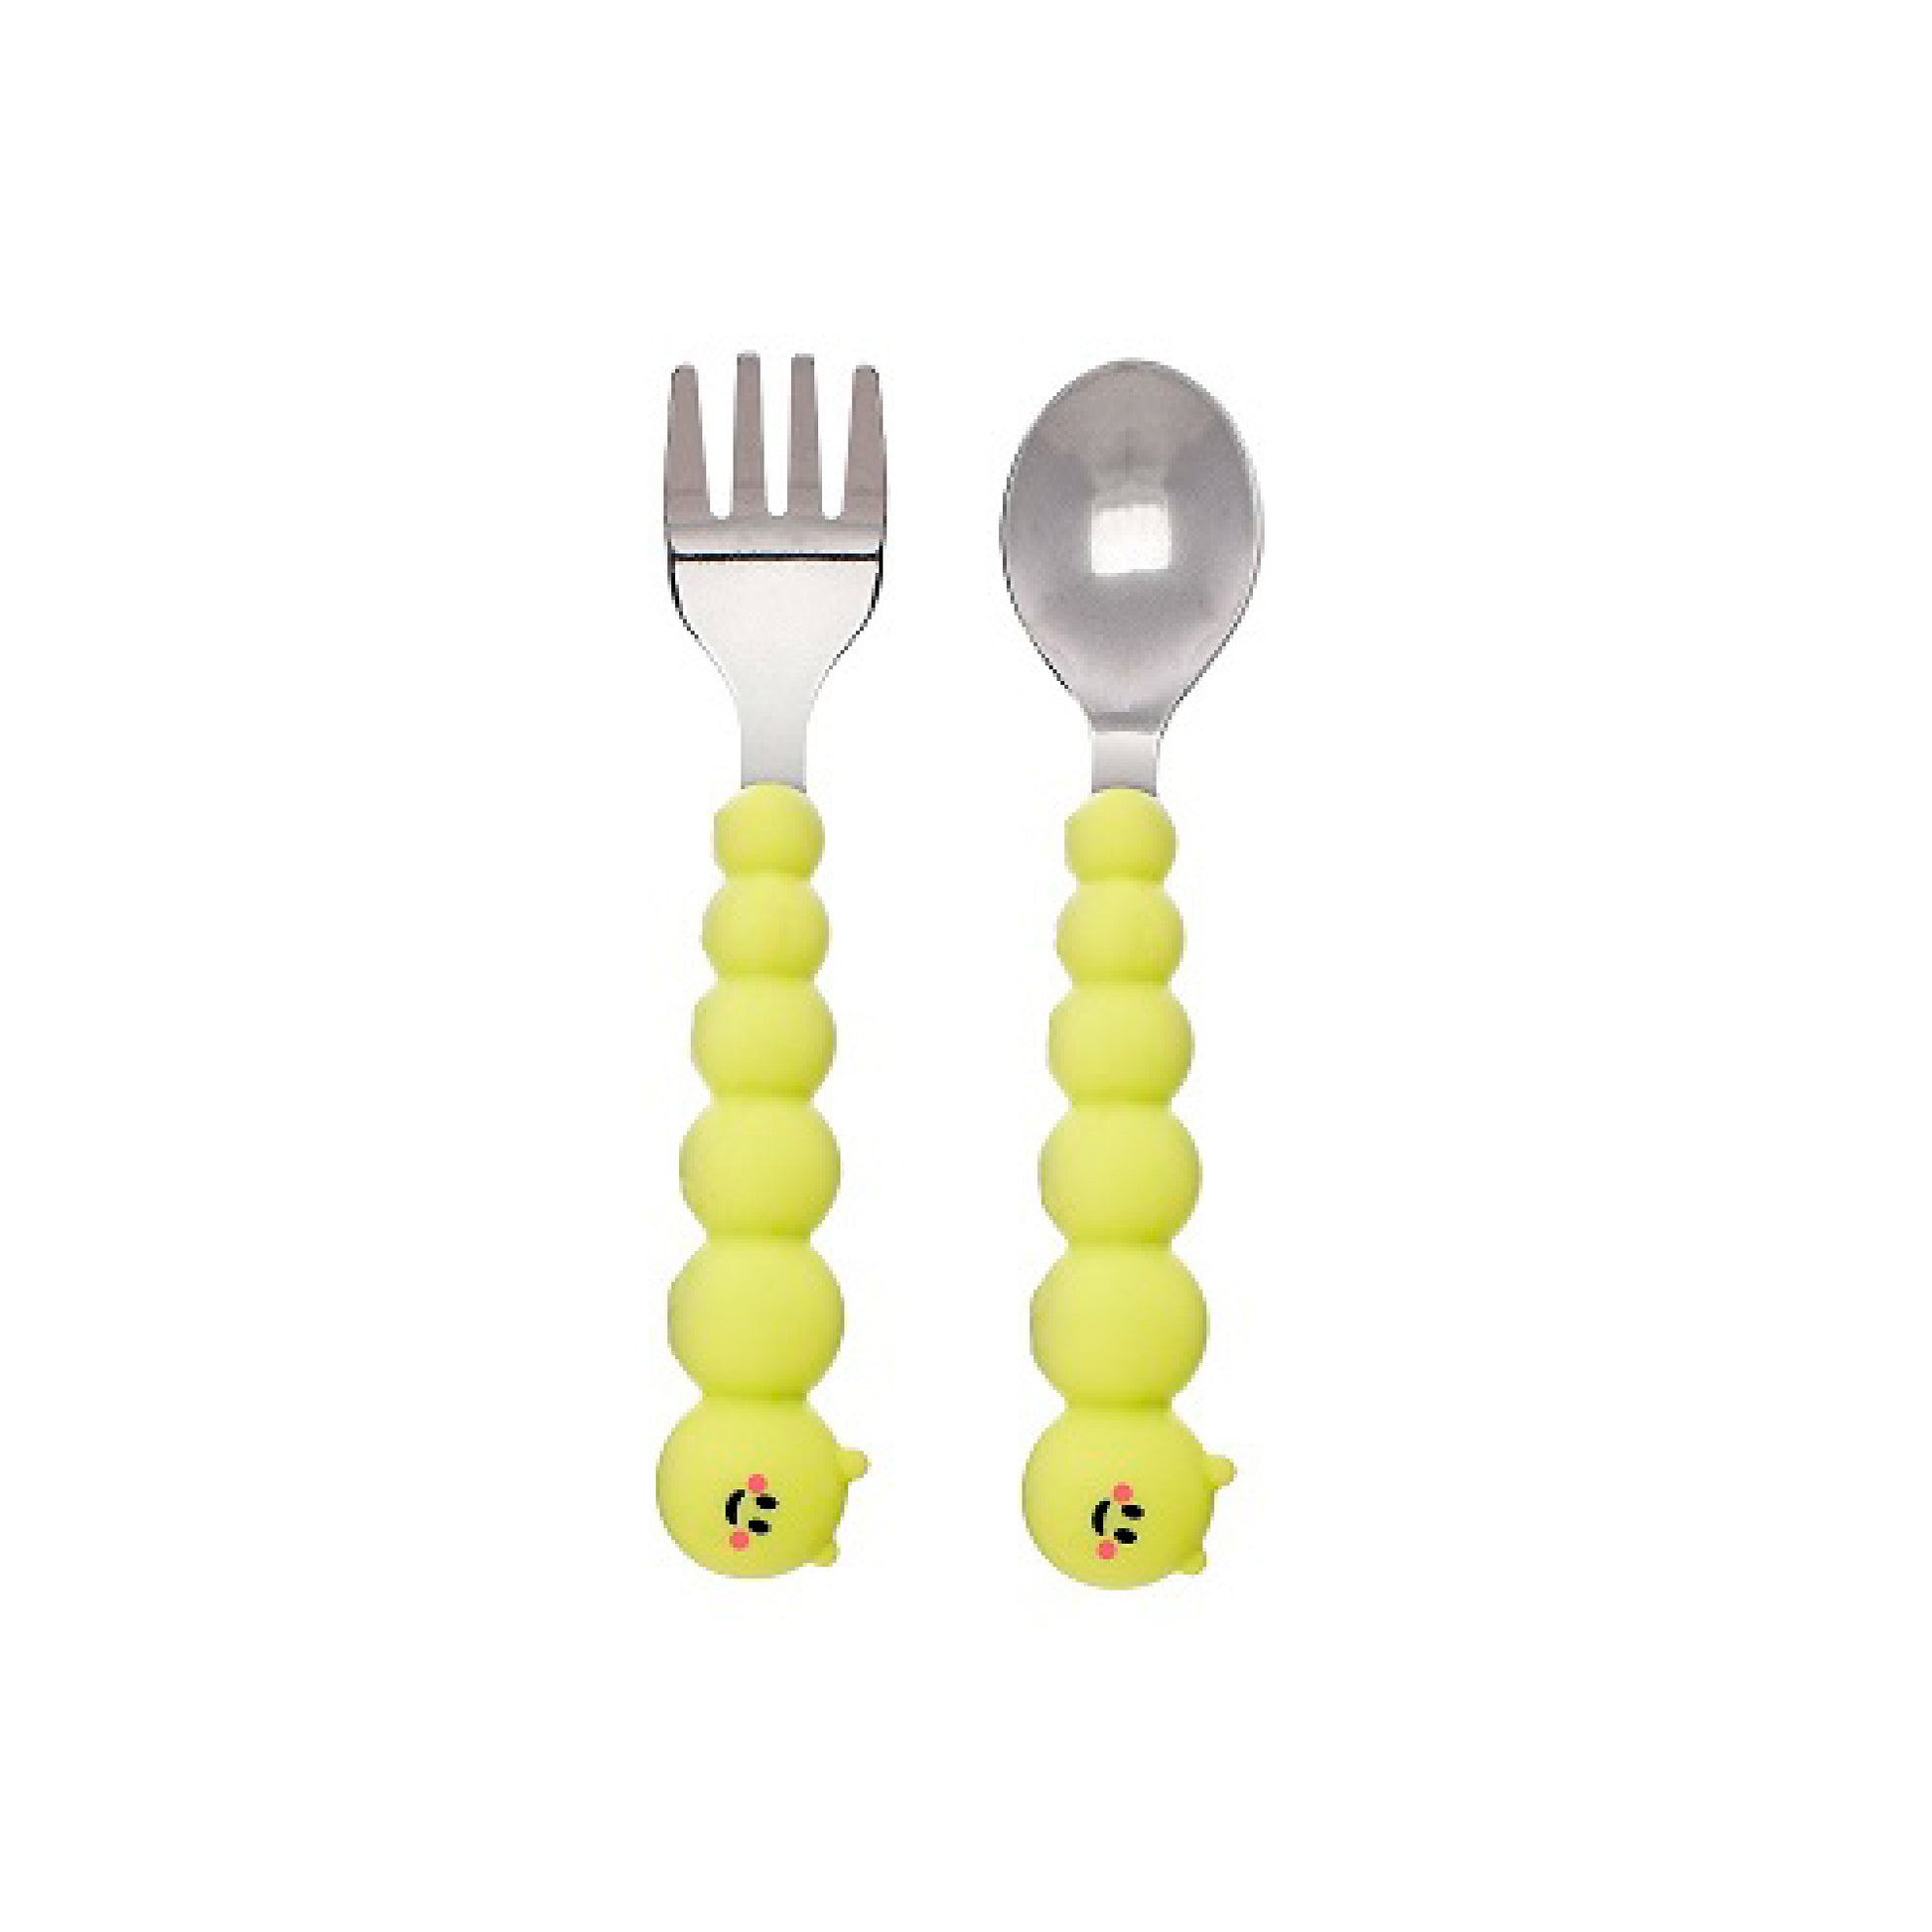 Melii Playful Caterpillar Spoon and Fork Set - Silicone & Stainless Steel Utensils for Toddler and Children, Fun and Durable Dining Experience